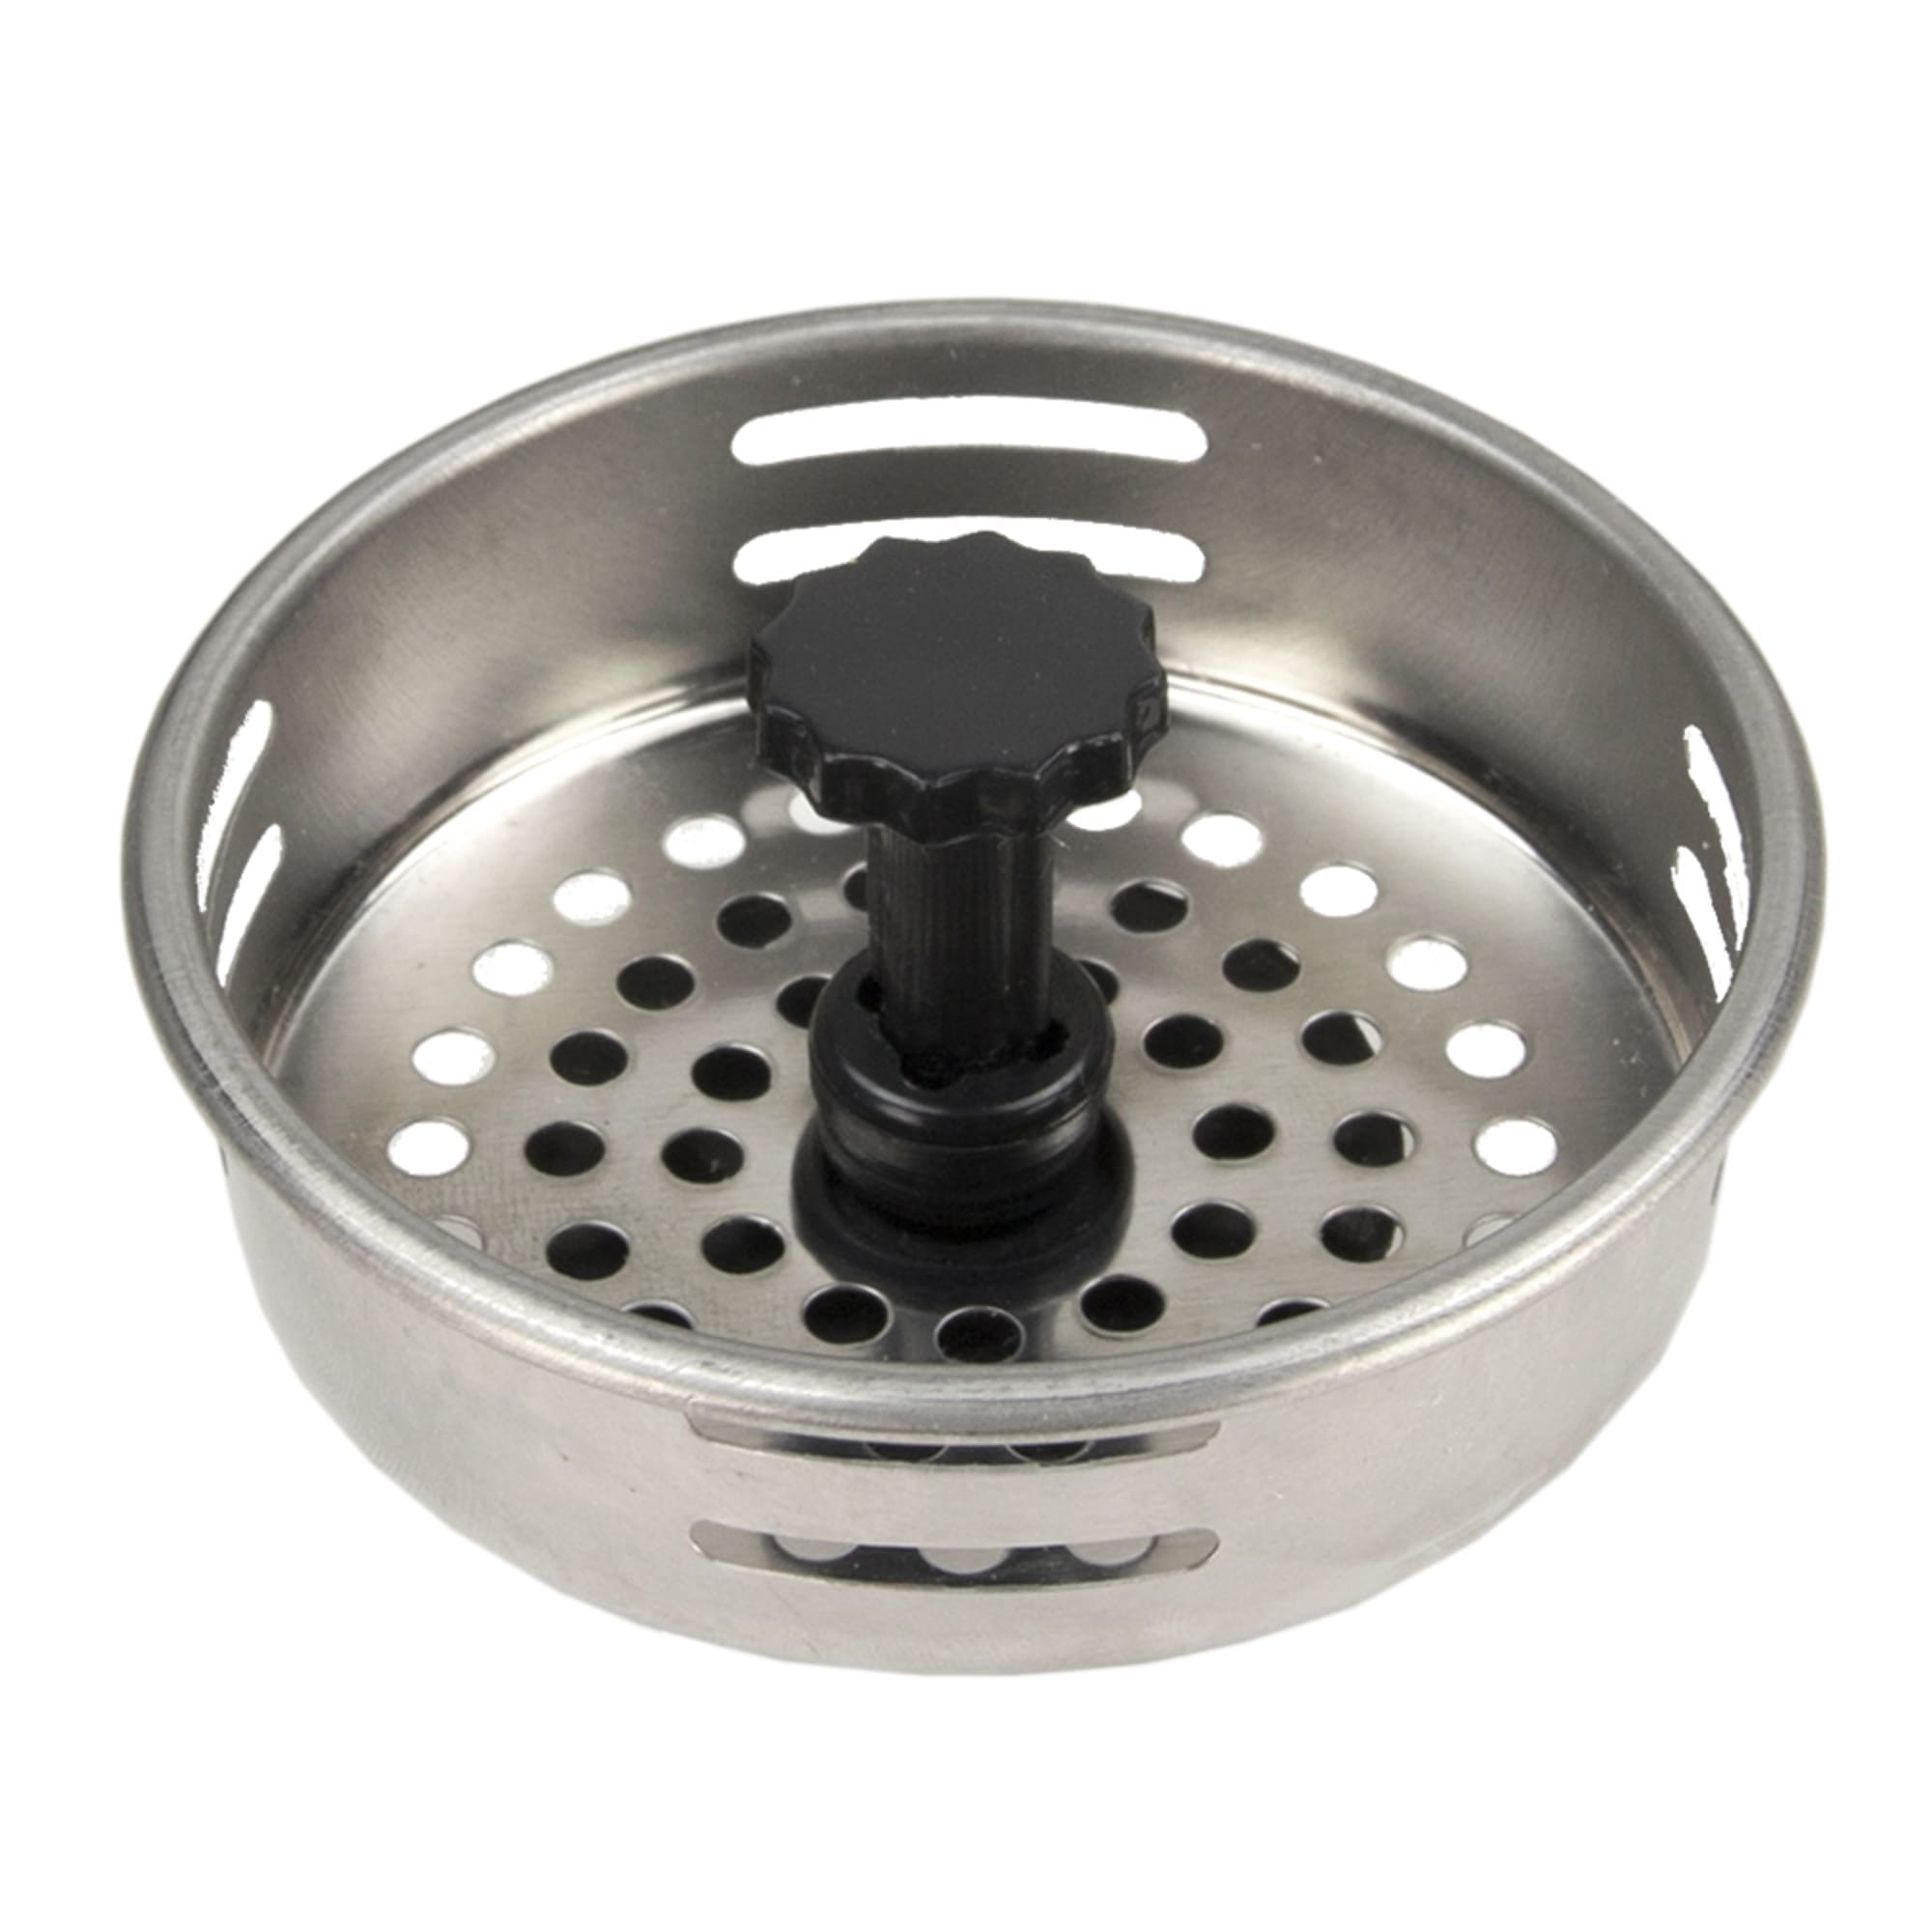 Home Basics Stainless Steel Sink Strainer $1.50 EACH, CASE PACK OF 48